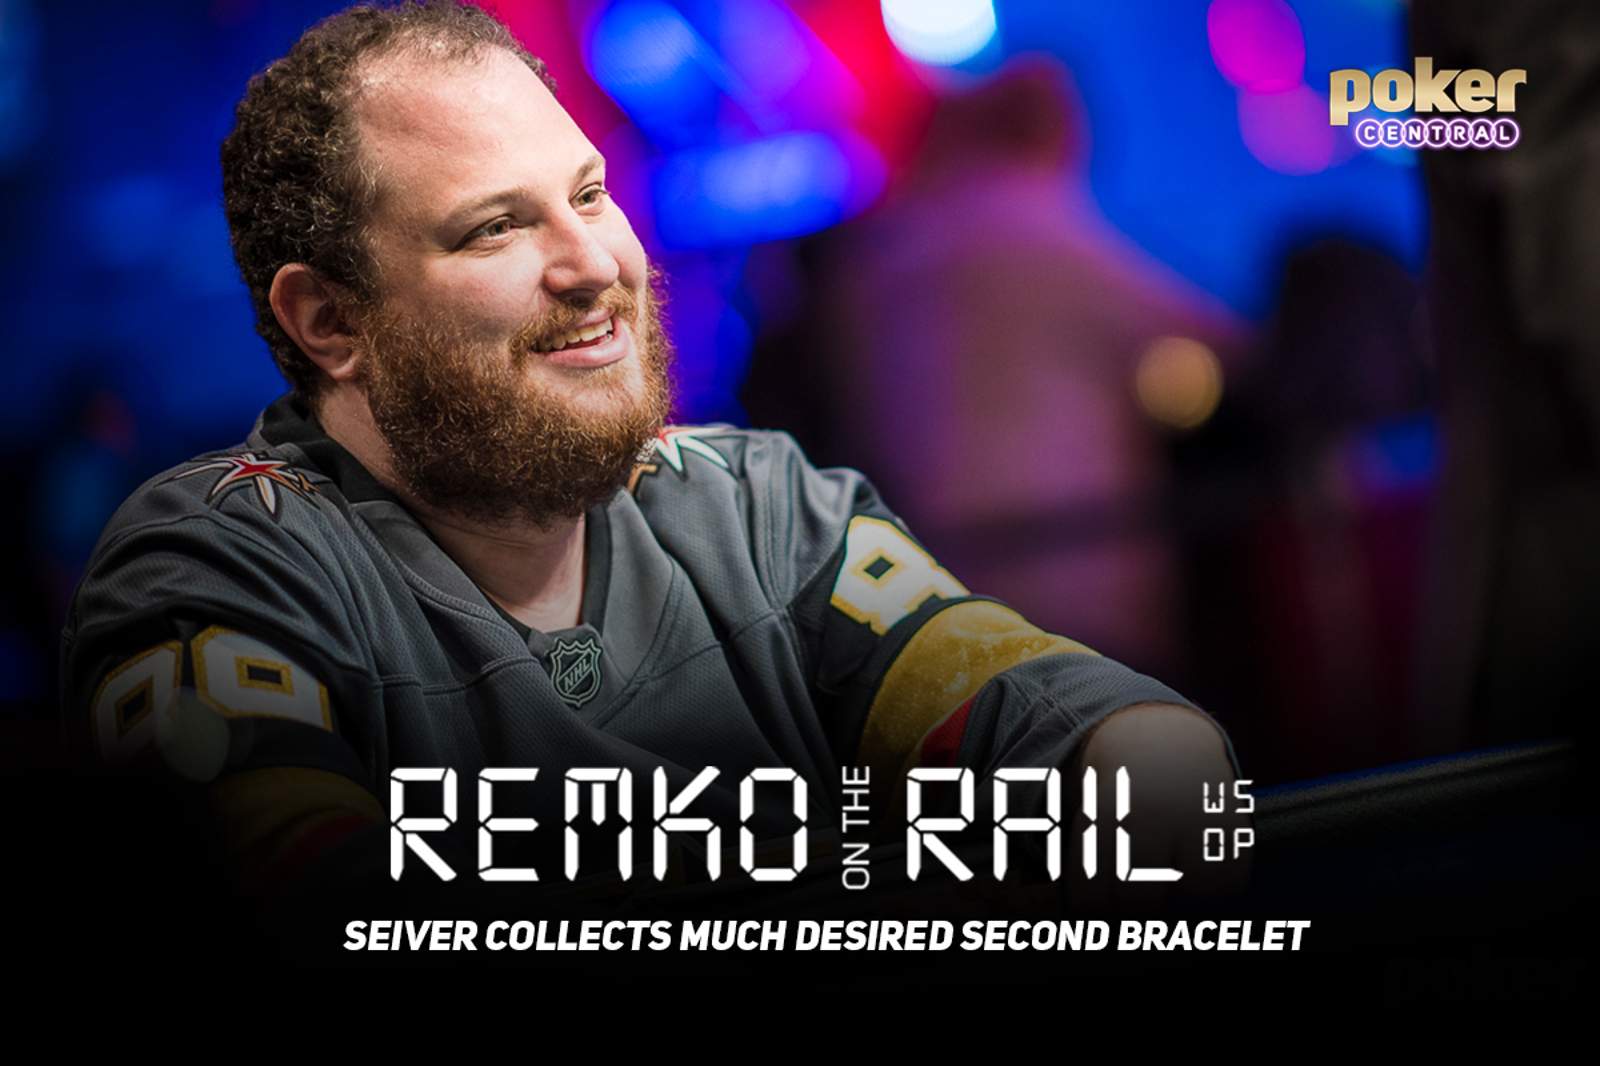 Remko on the Rail – Seiver Collects Much Desired Second Bracelet